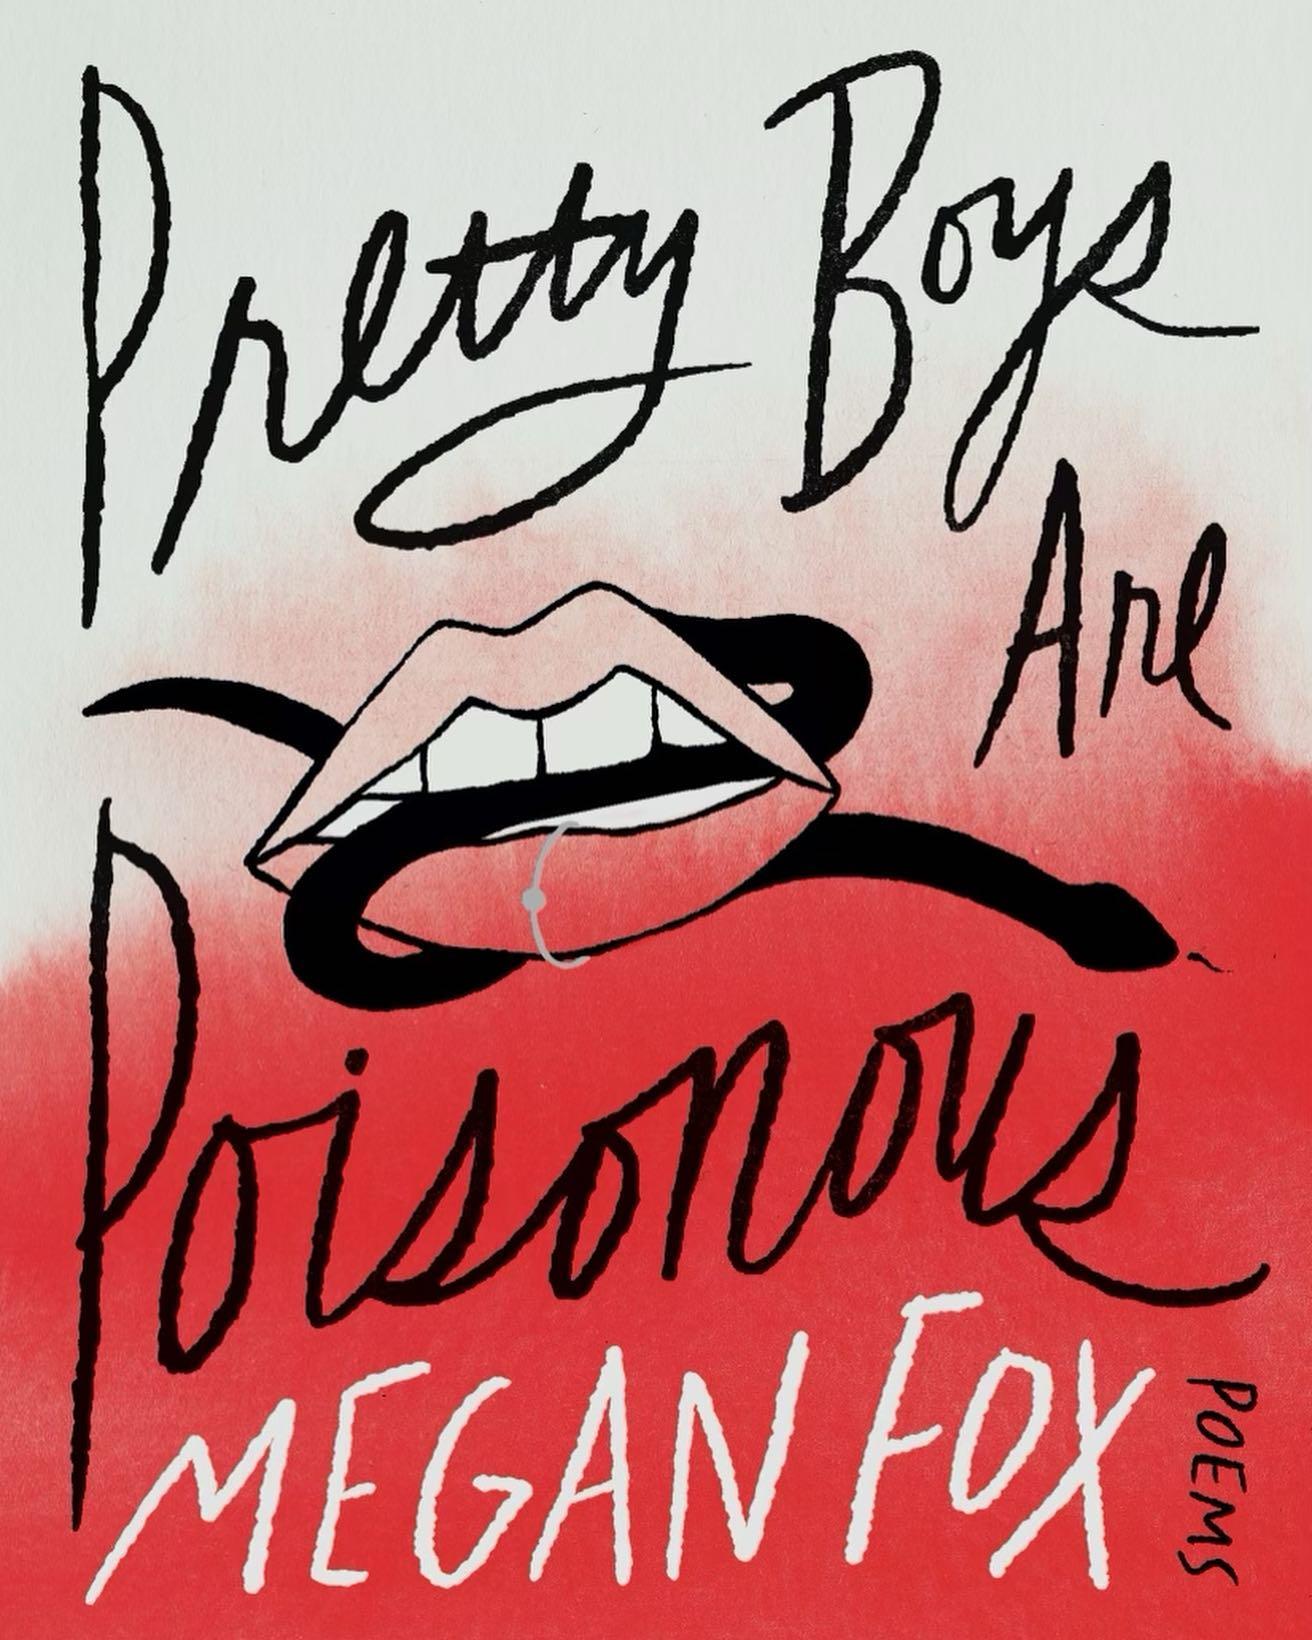 Megan Fox Releases 'Pretty Boys Are Poisonous' Poetry Book